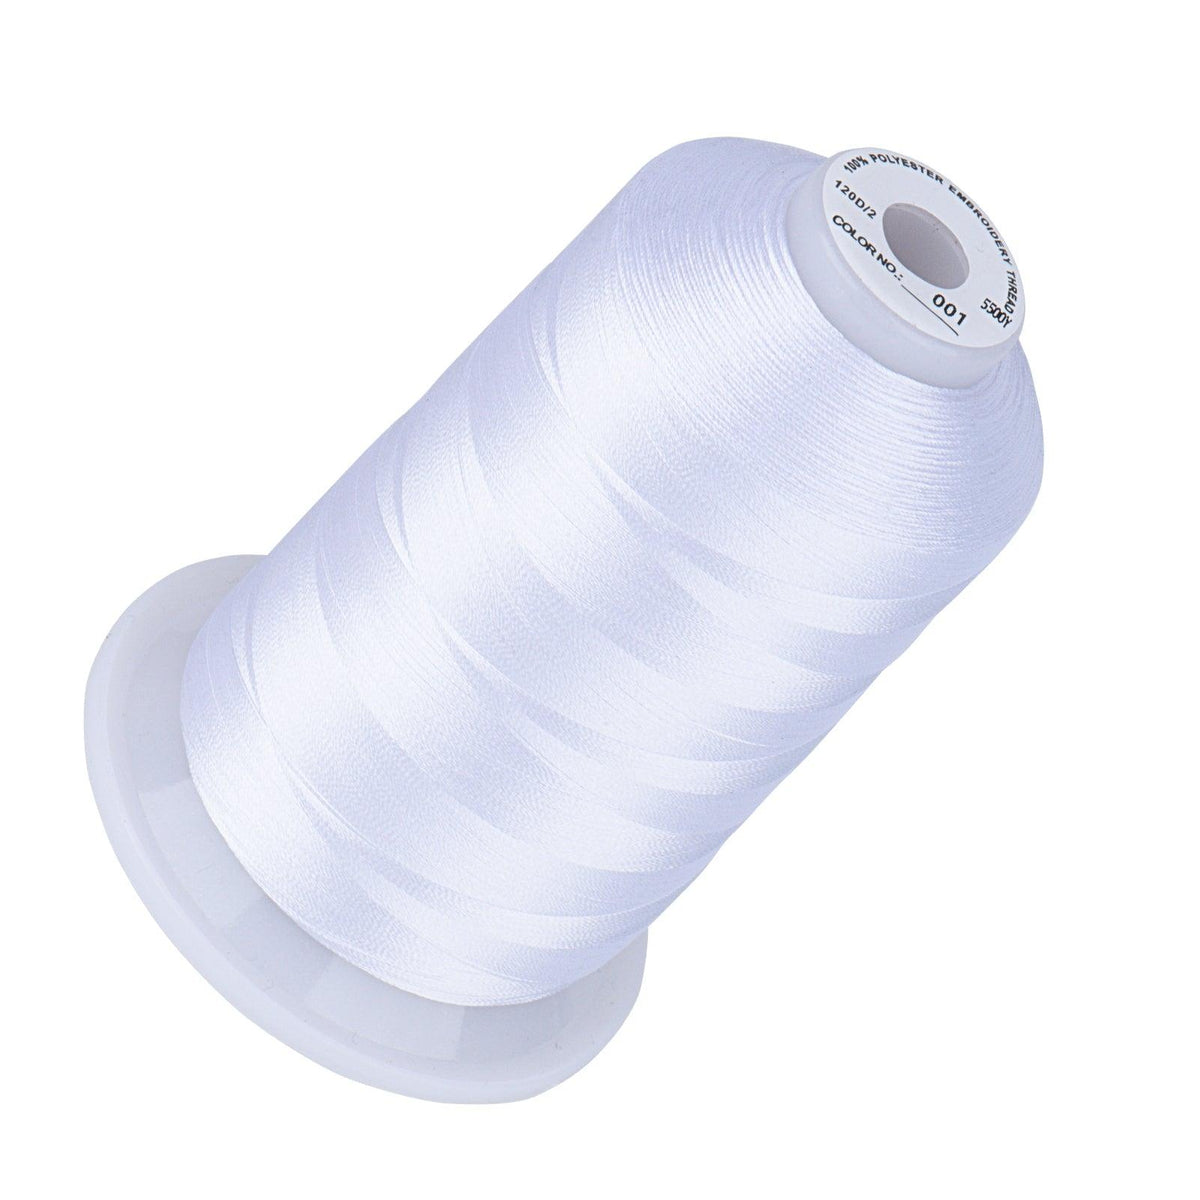 Exquisite Polyester Embroidery Thread - 010 White 1000M or 5000M